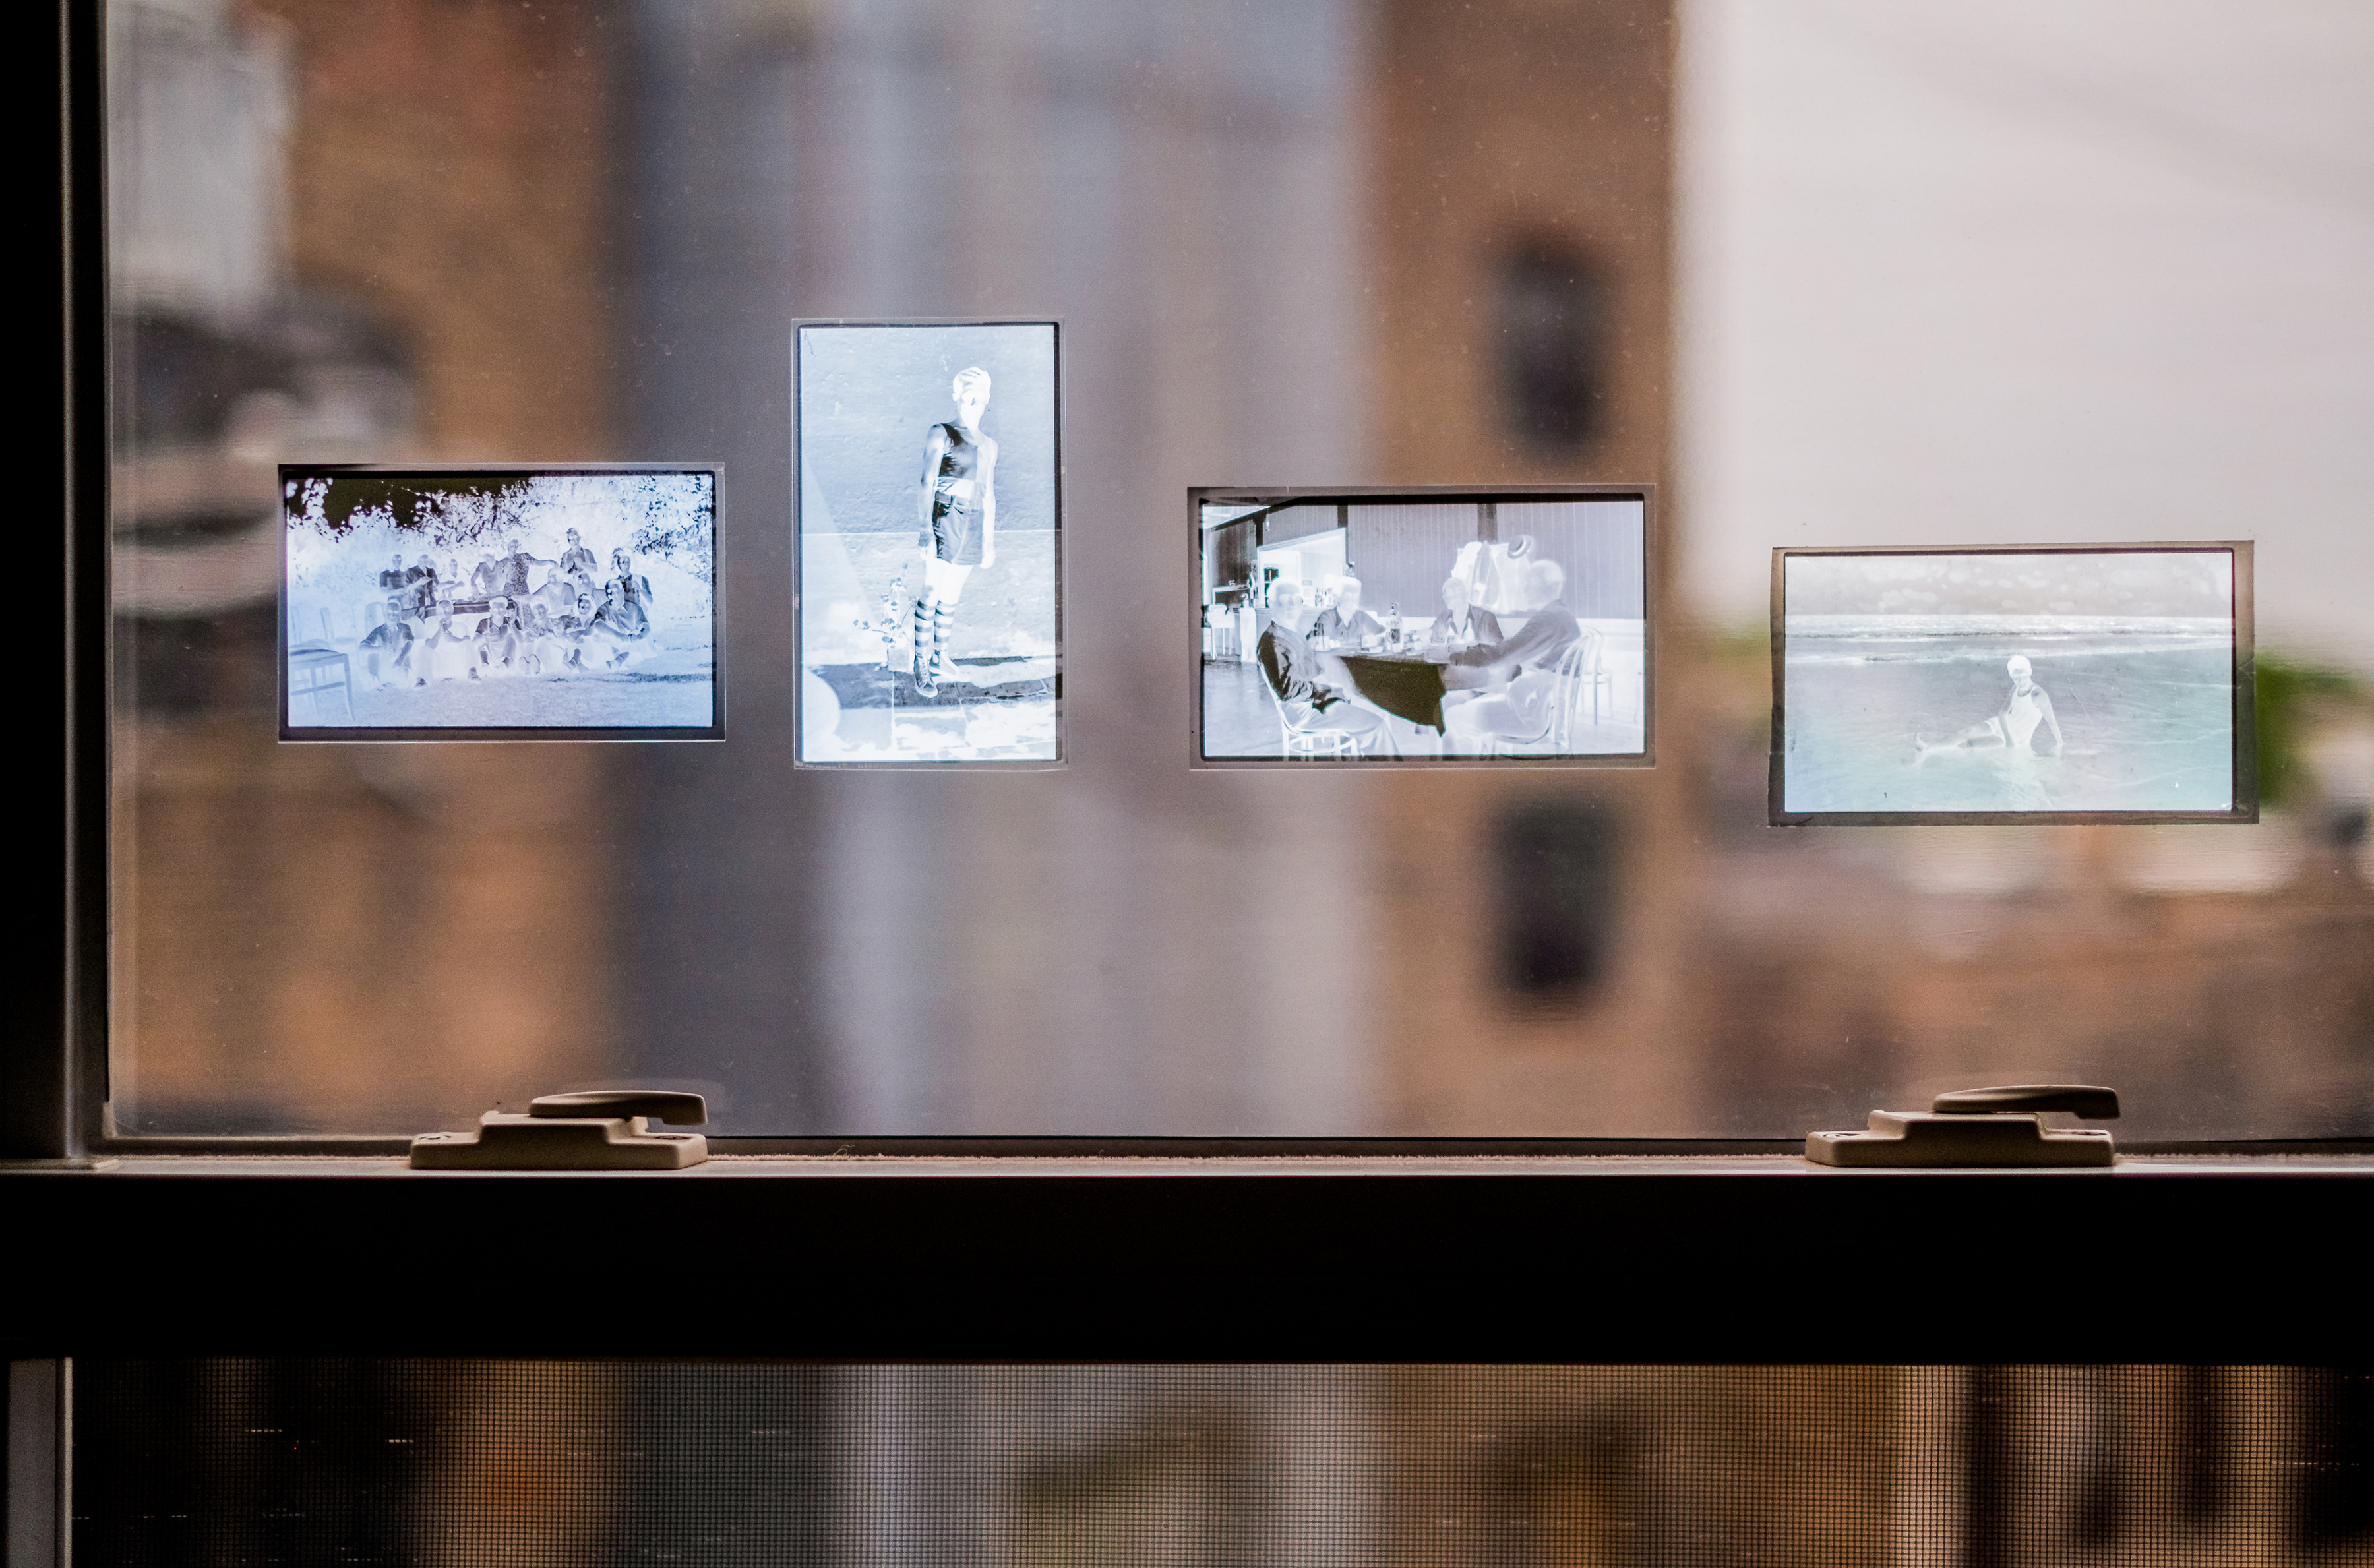 Featured Image: Andre Keichian, 'Salt in the I' (detail), 2019. View of negatives from Keichian's family photo album adhered to a glass window as part of the exhibition installation at table. Photo by Kim Becker. Image courtesy of Kyle Bellucci Johanson.